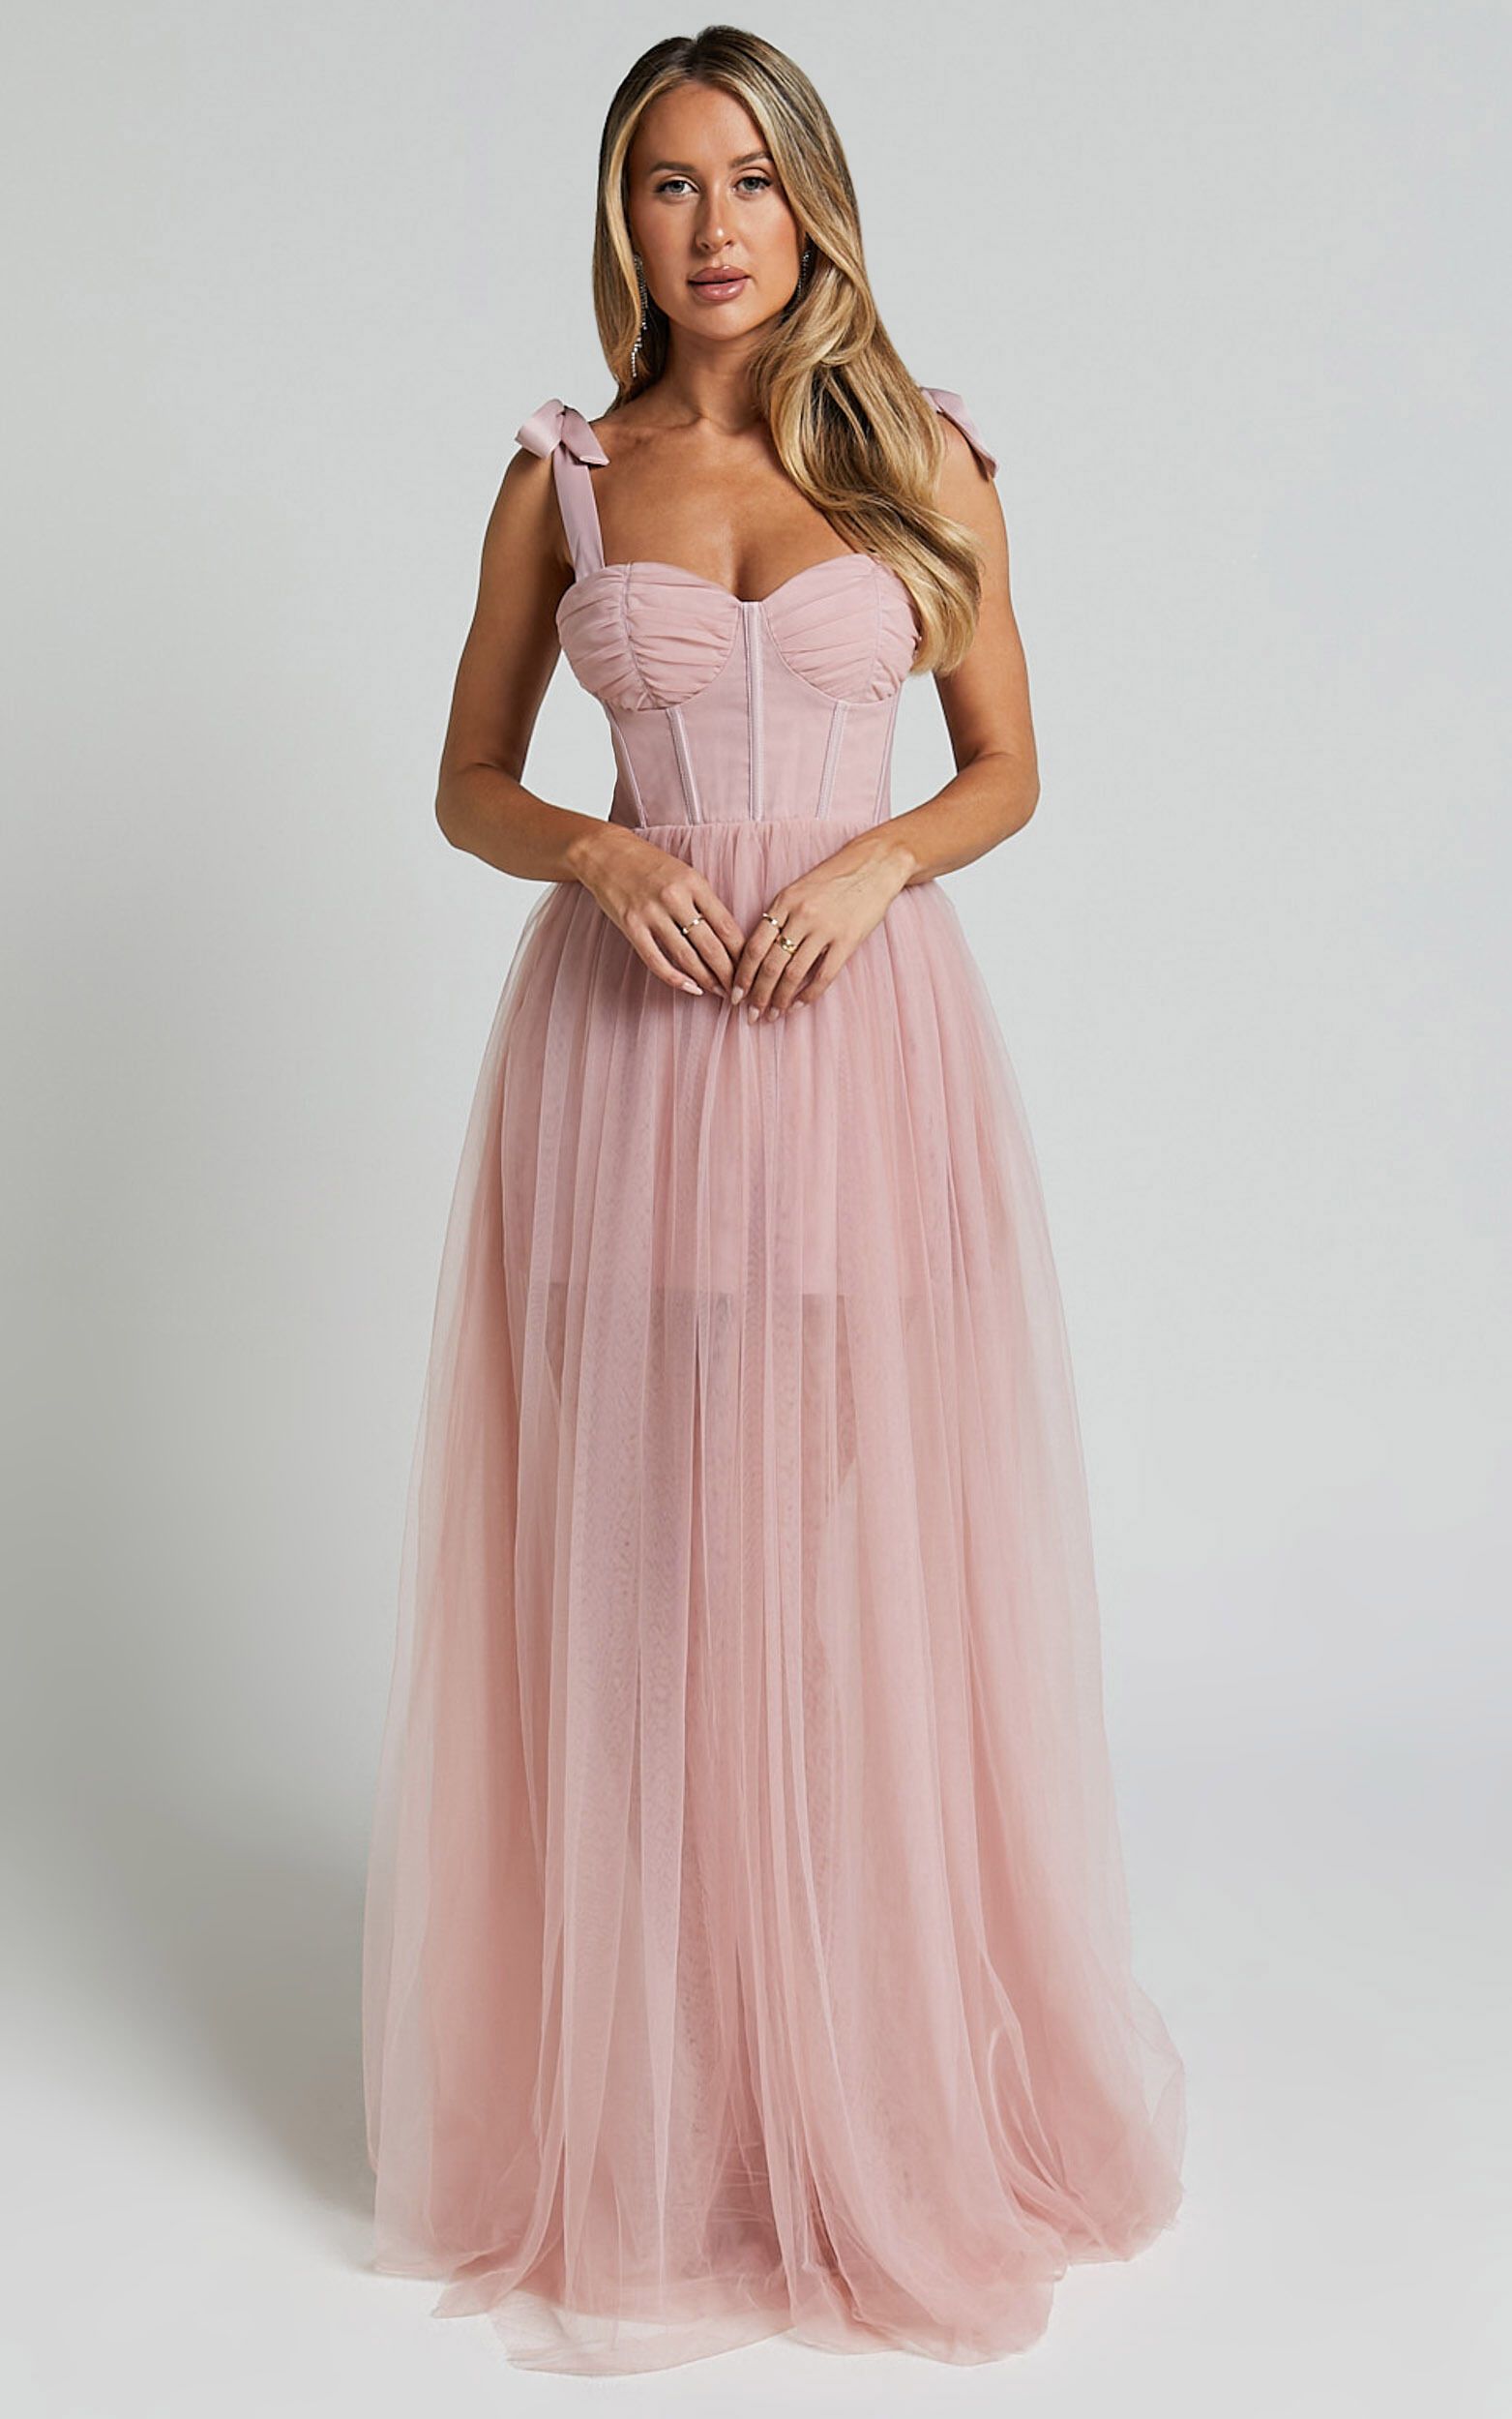 Emmary Gown - Bustier Bodice Tulle Gown in Pink | Showpo (US, UK & Europe)